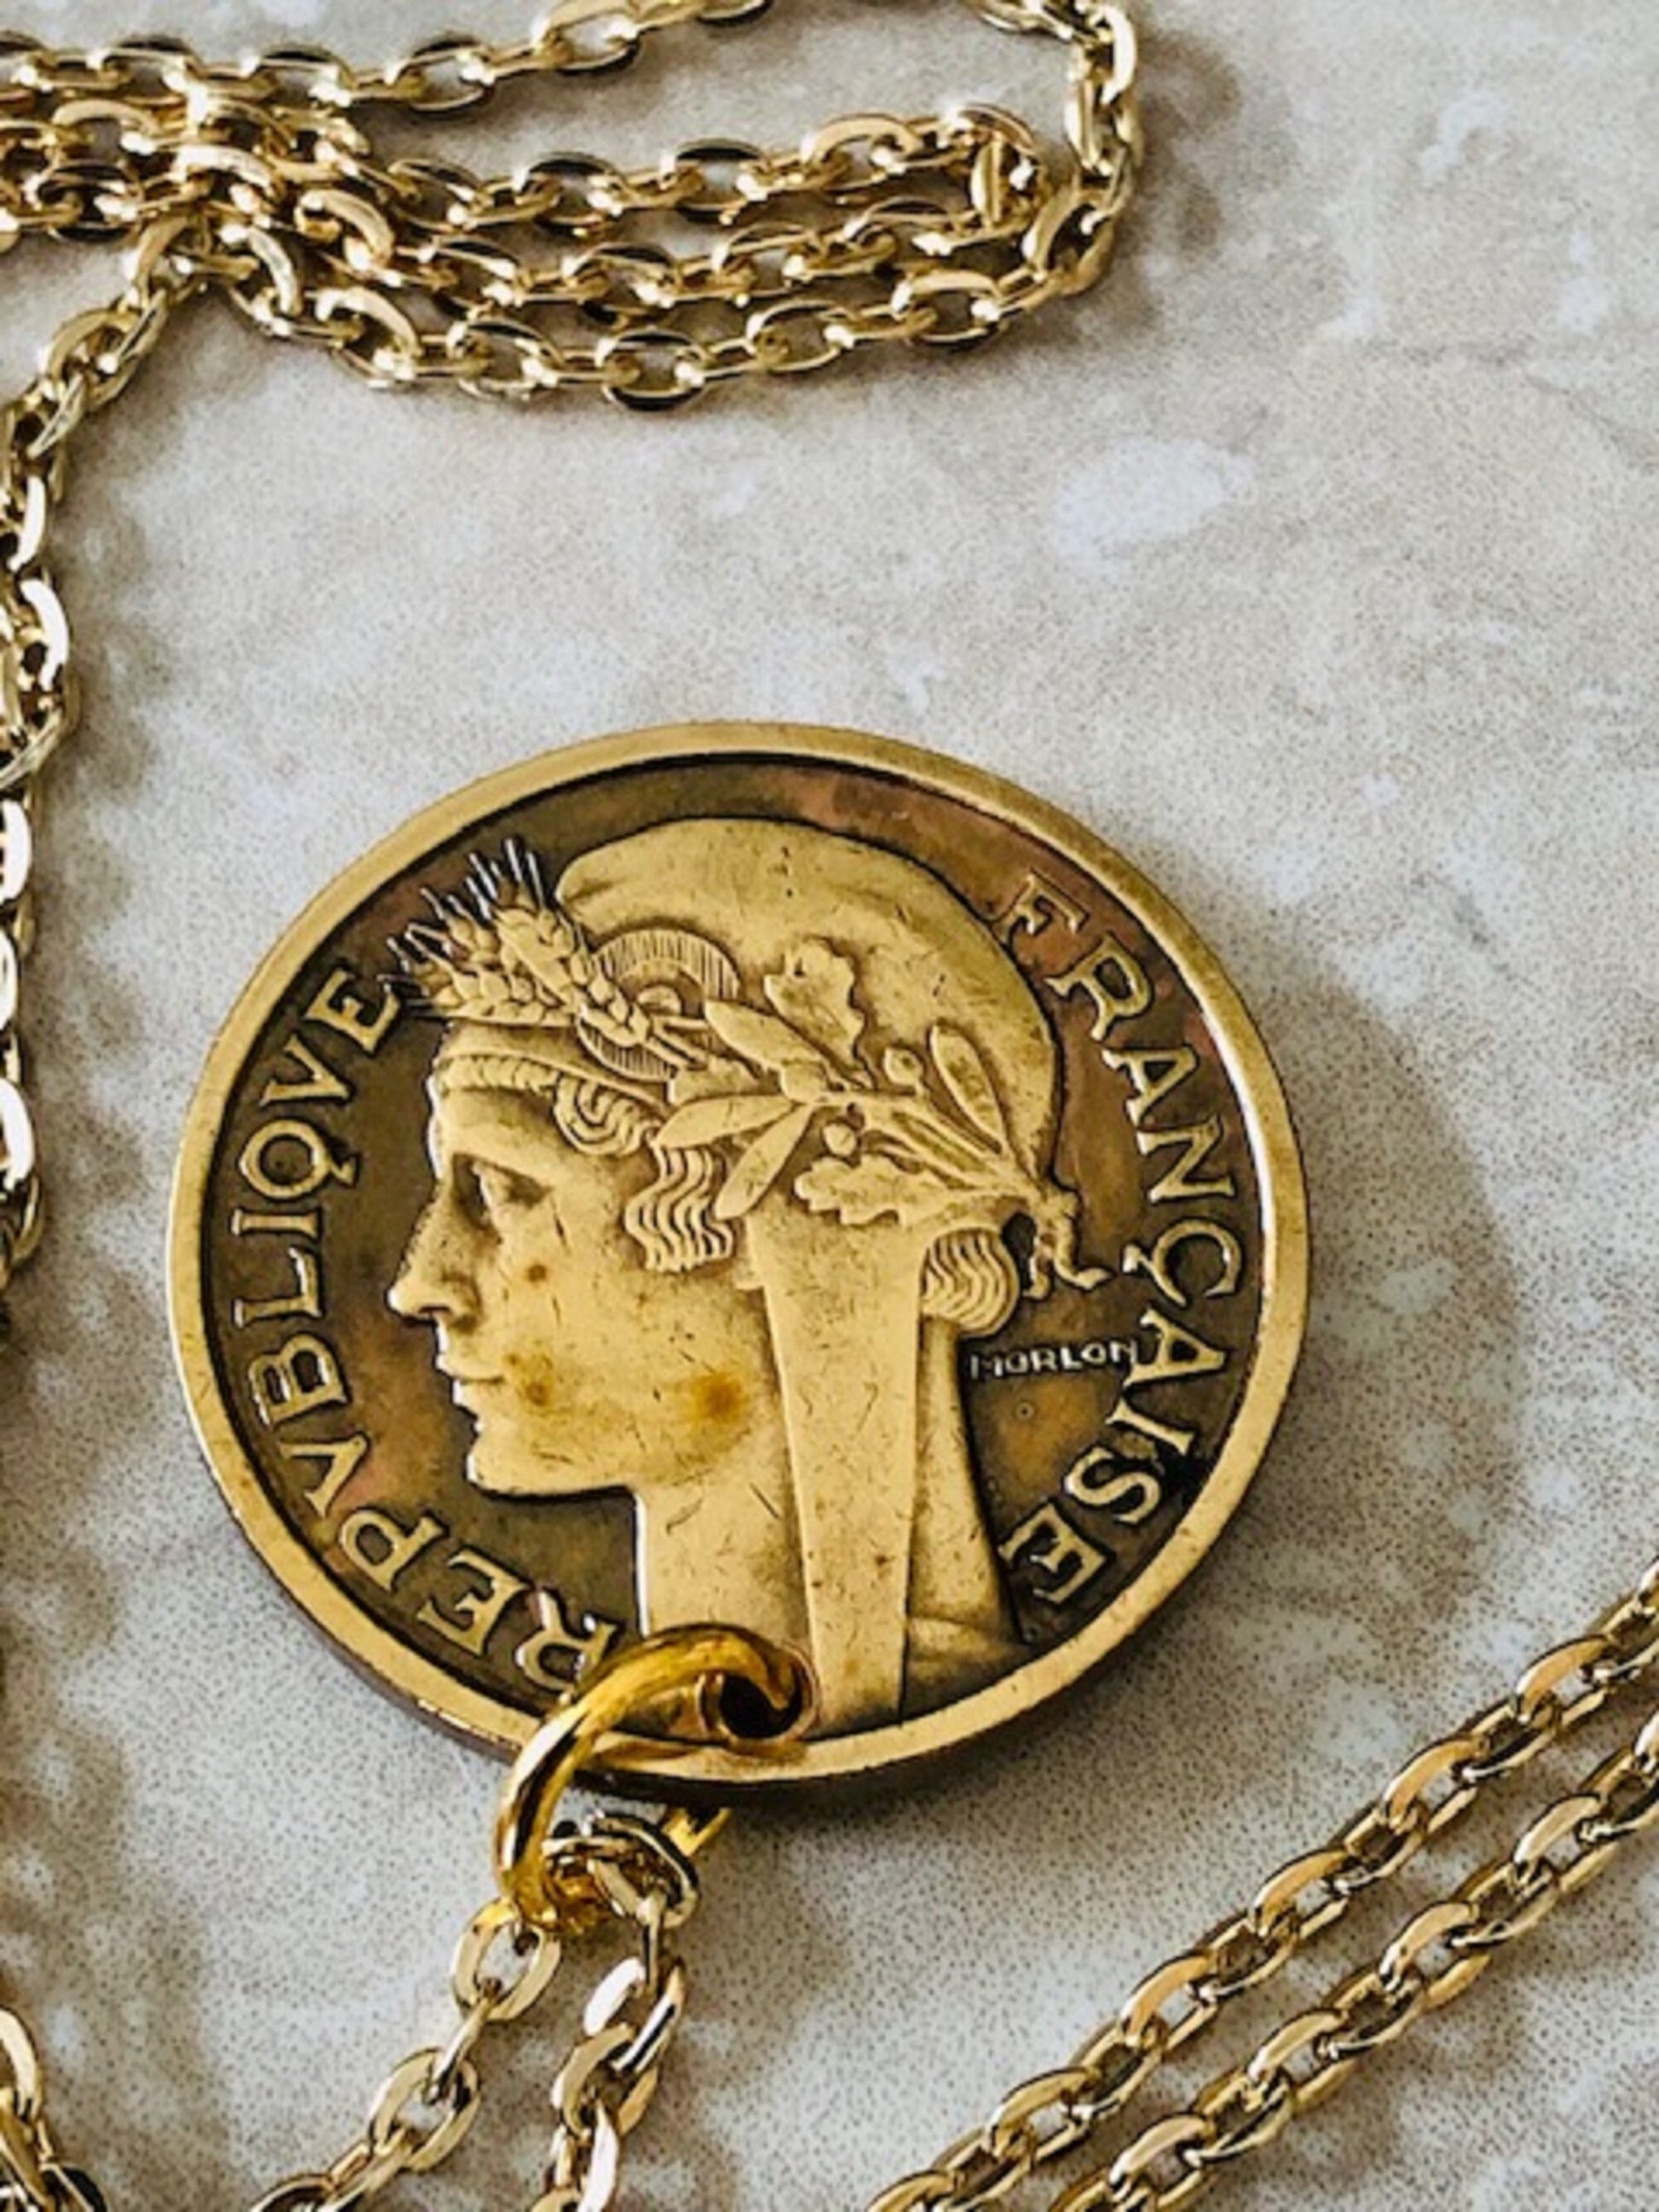 France Coin Necklace Pendant 2 Francs LIBERTE EGALITE FRATERNITE Custom Made Rare coins - Coin Enthusiast Necklace - Choose your date